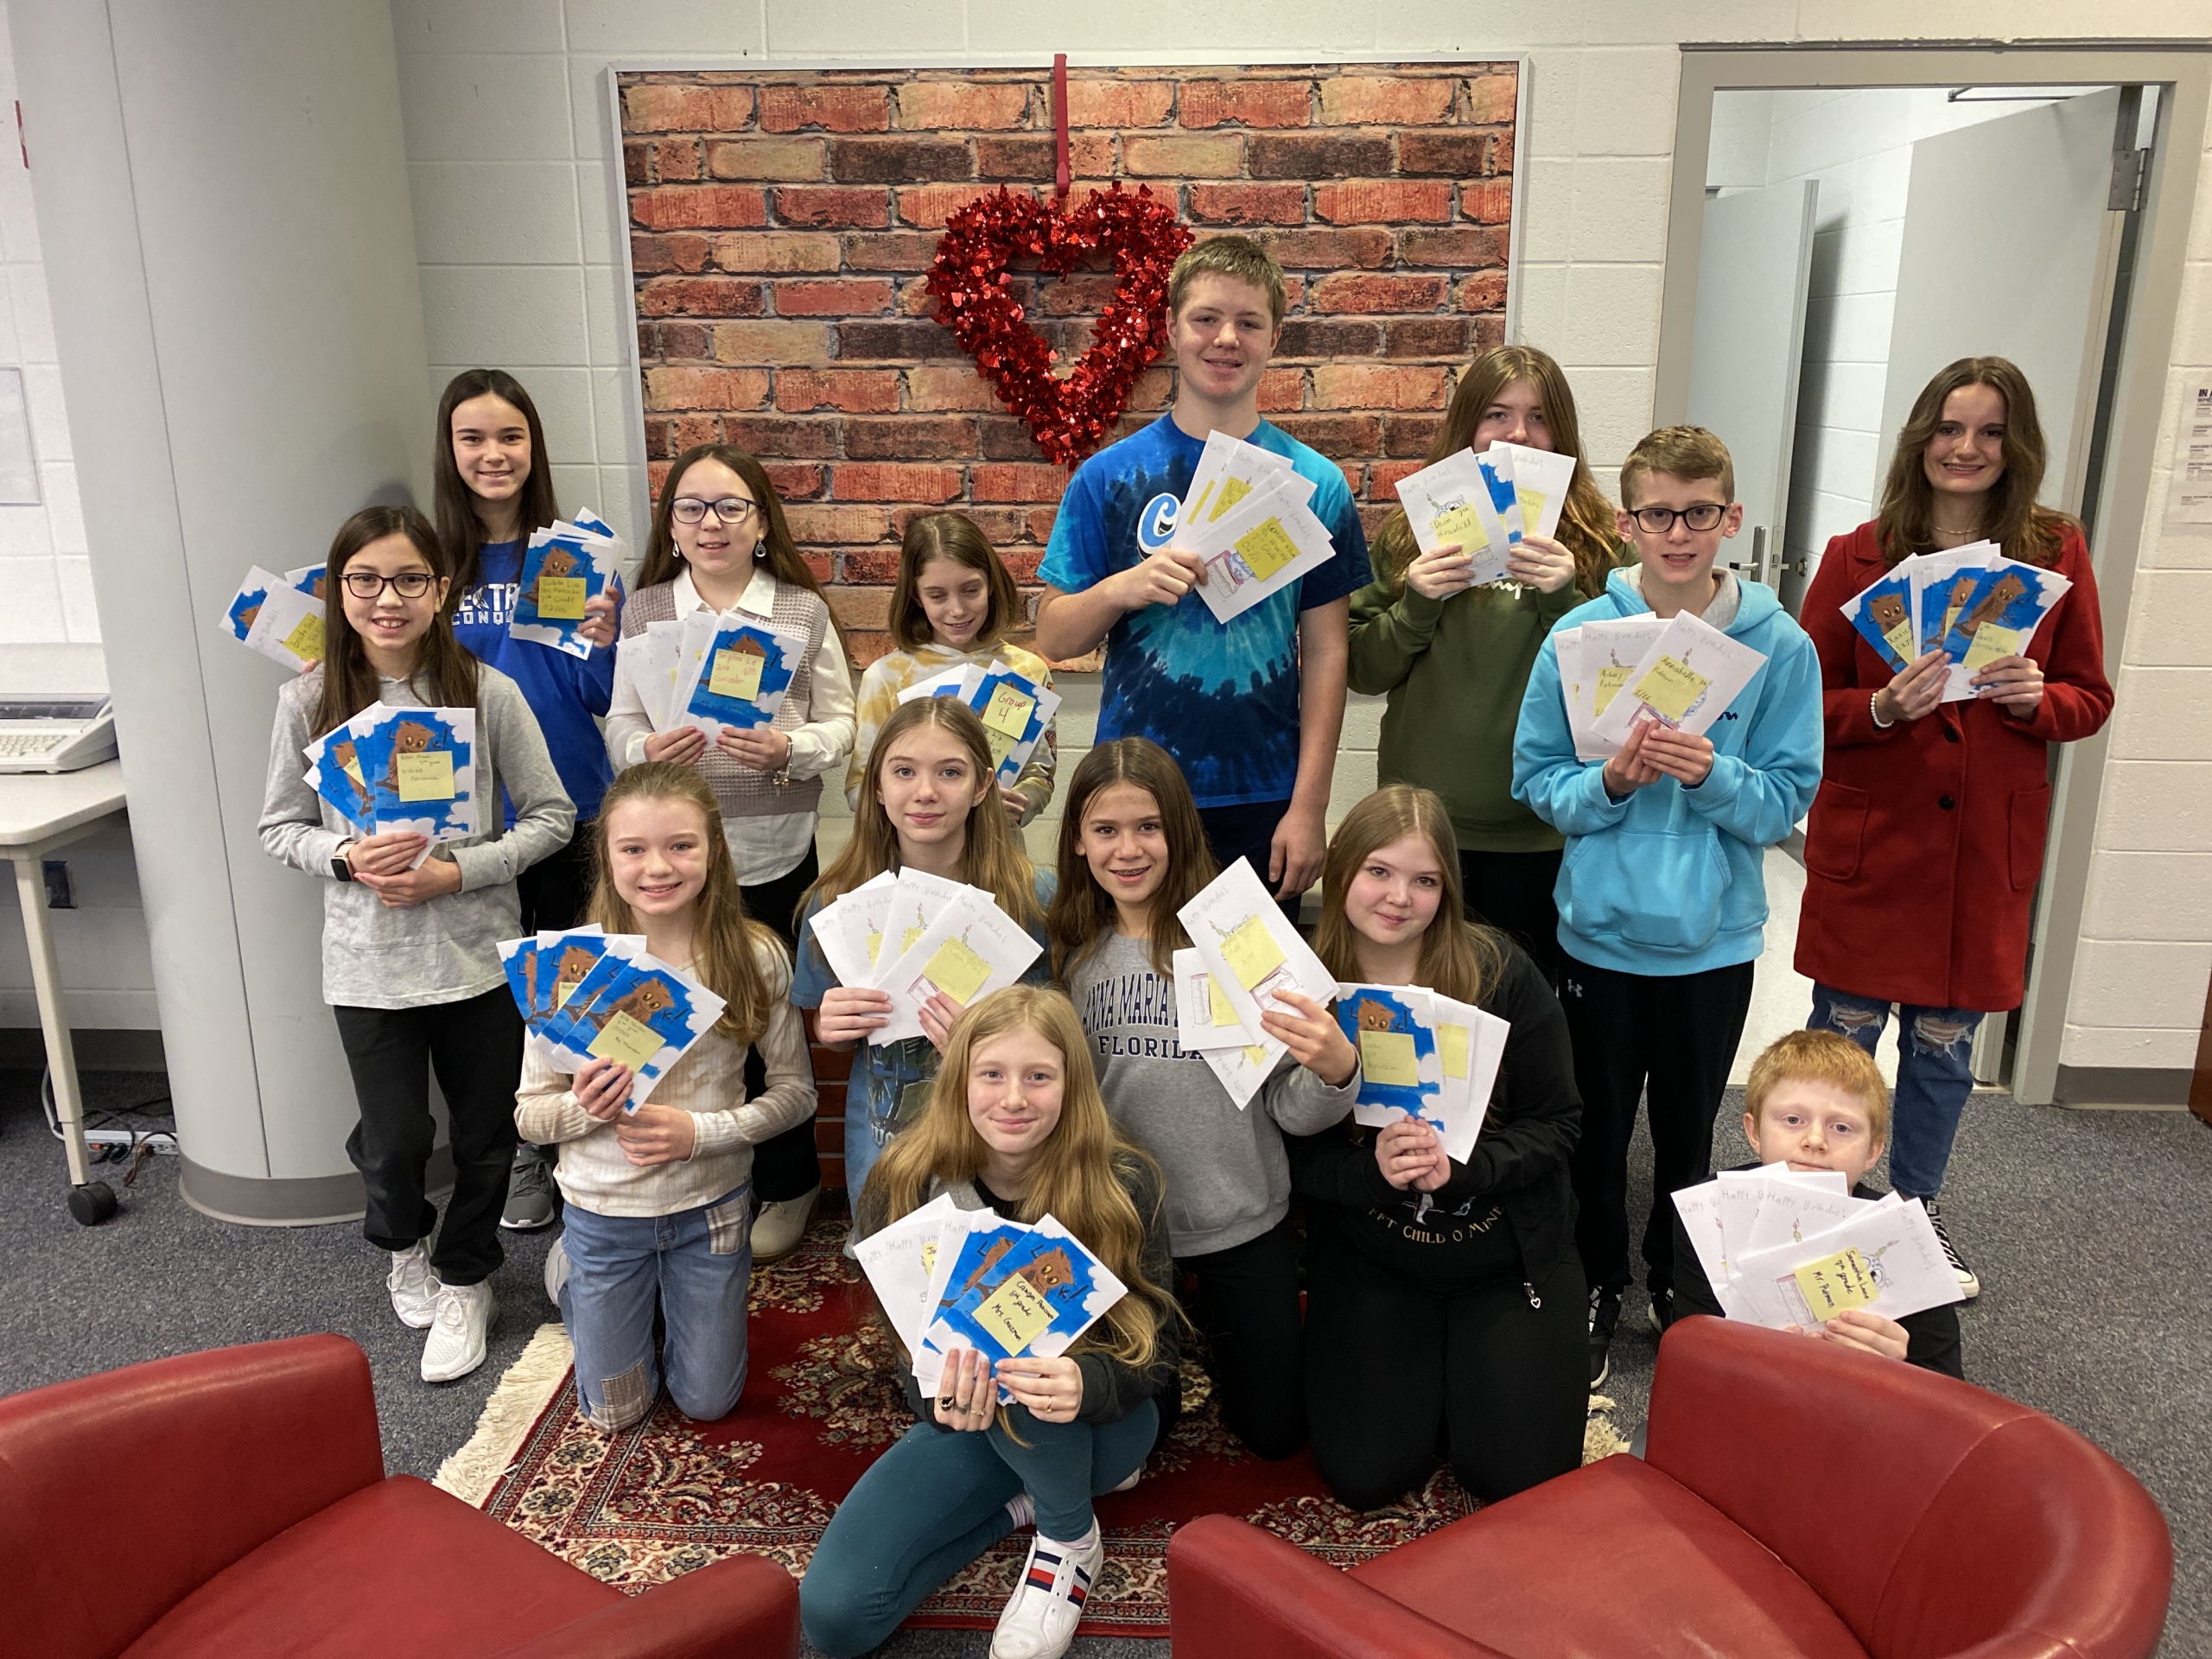 HELP CLUB members met before school and finished over 90 birthday cards for students’ birthdays for the next 6 months! Great job, students!!!